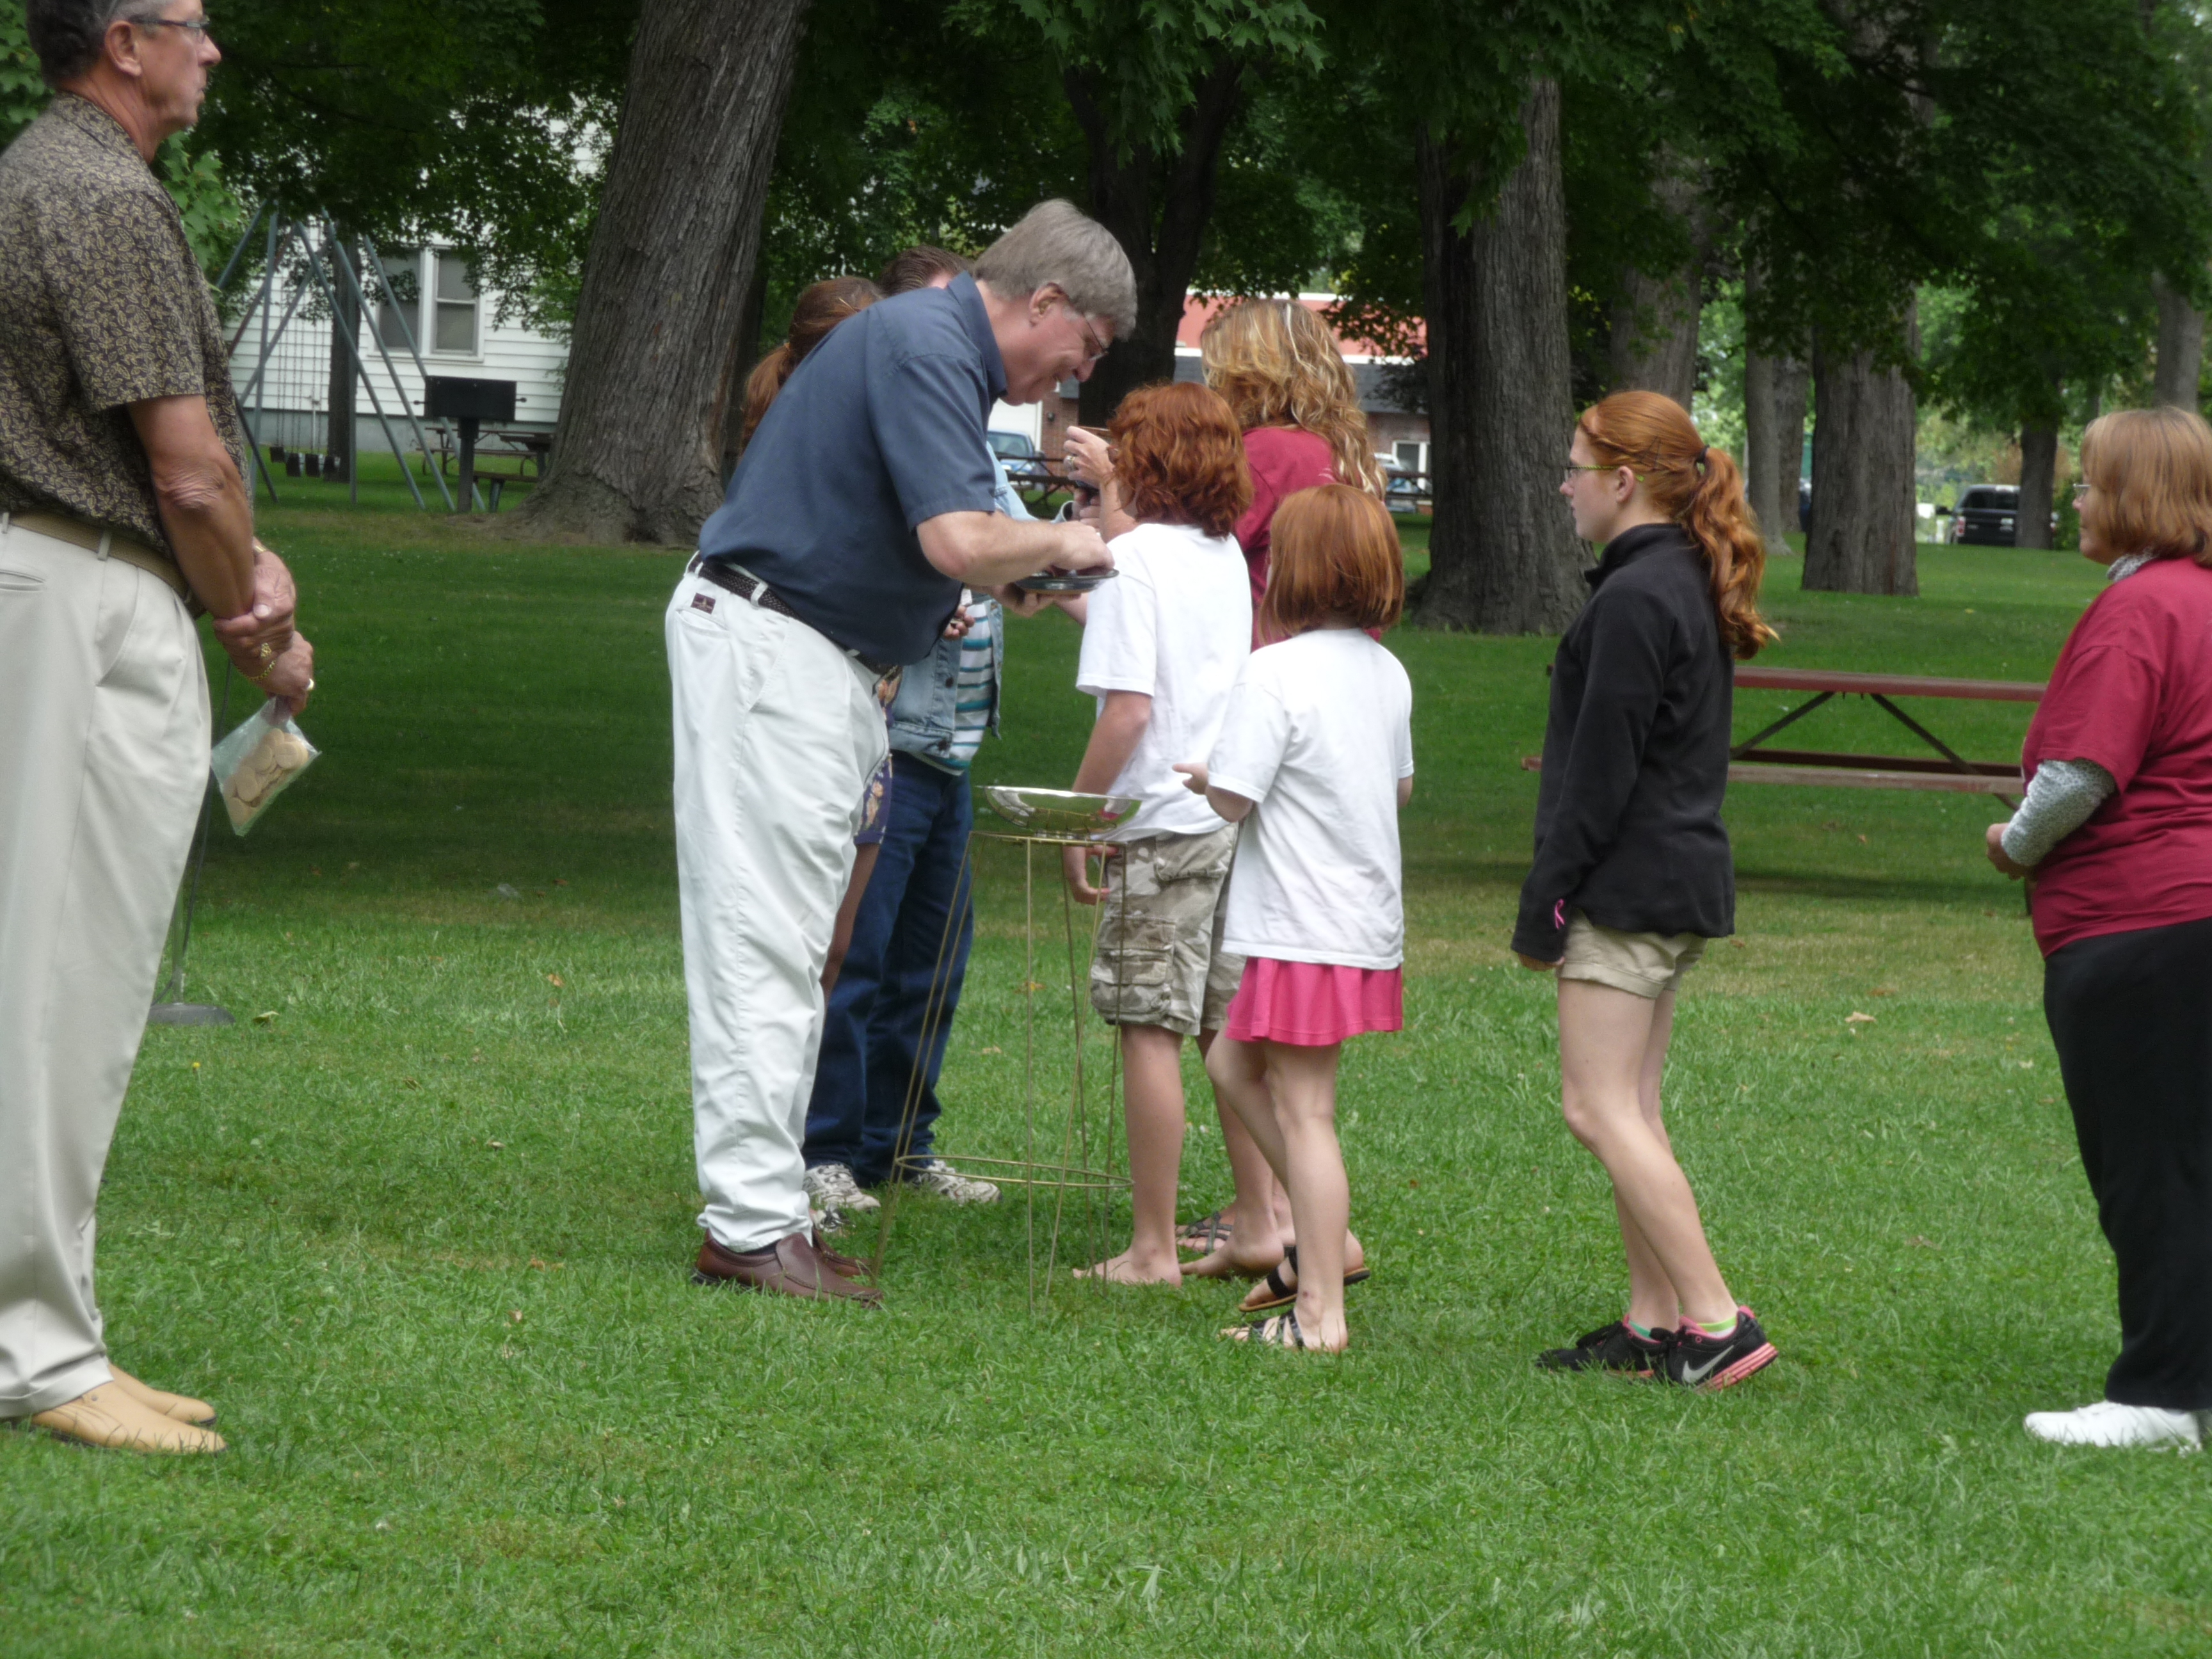 Kids at communion in park